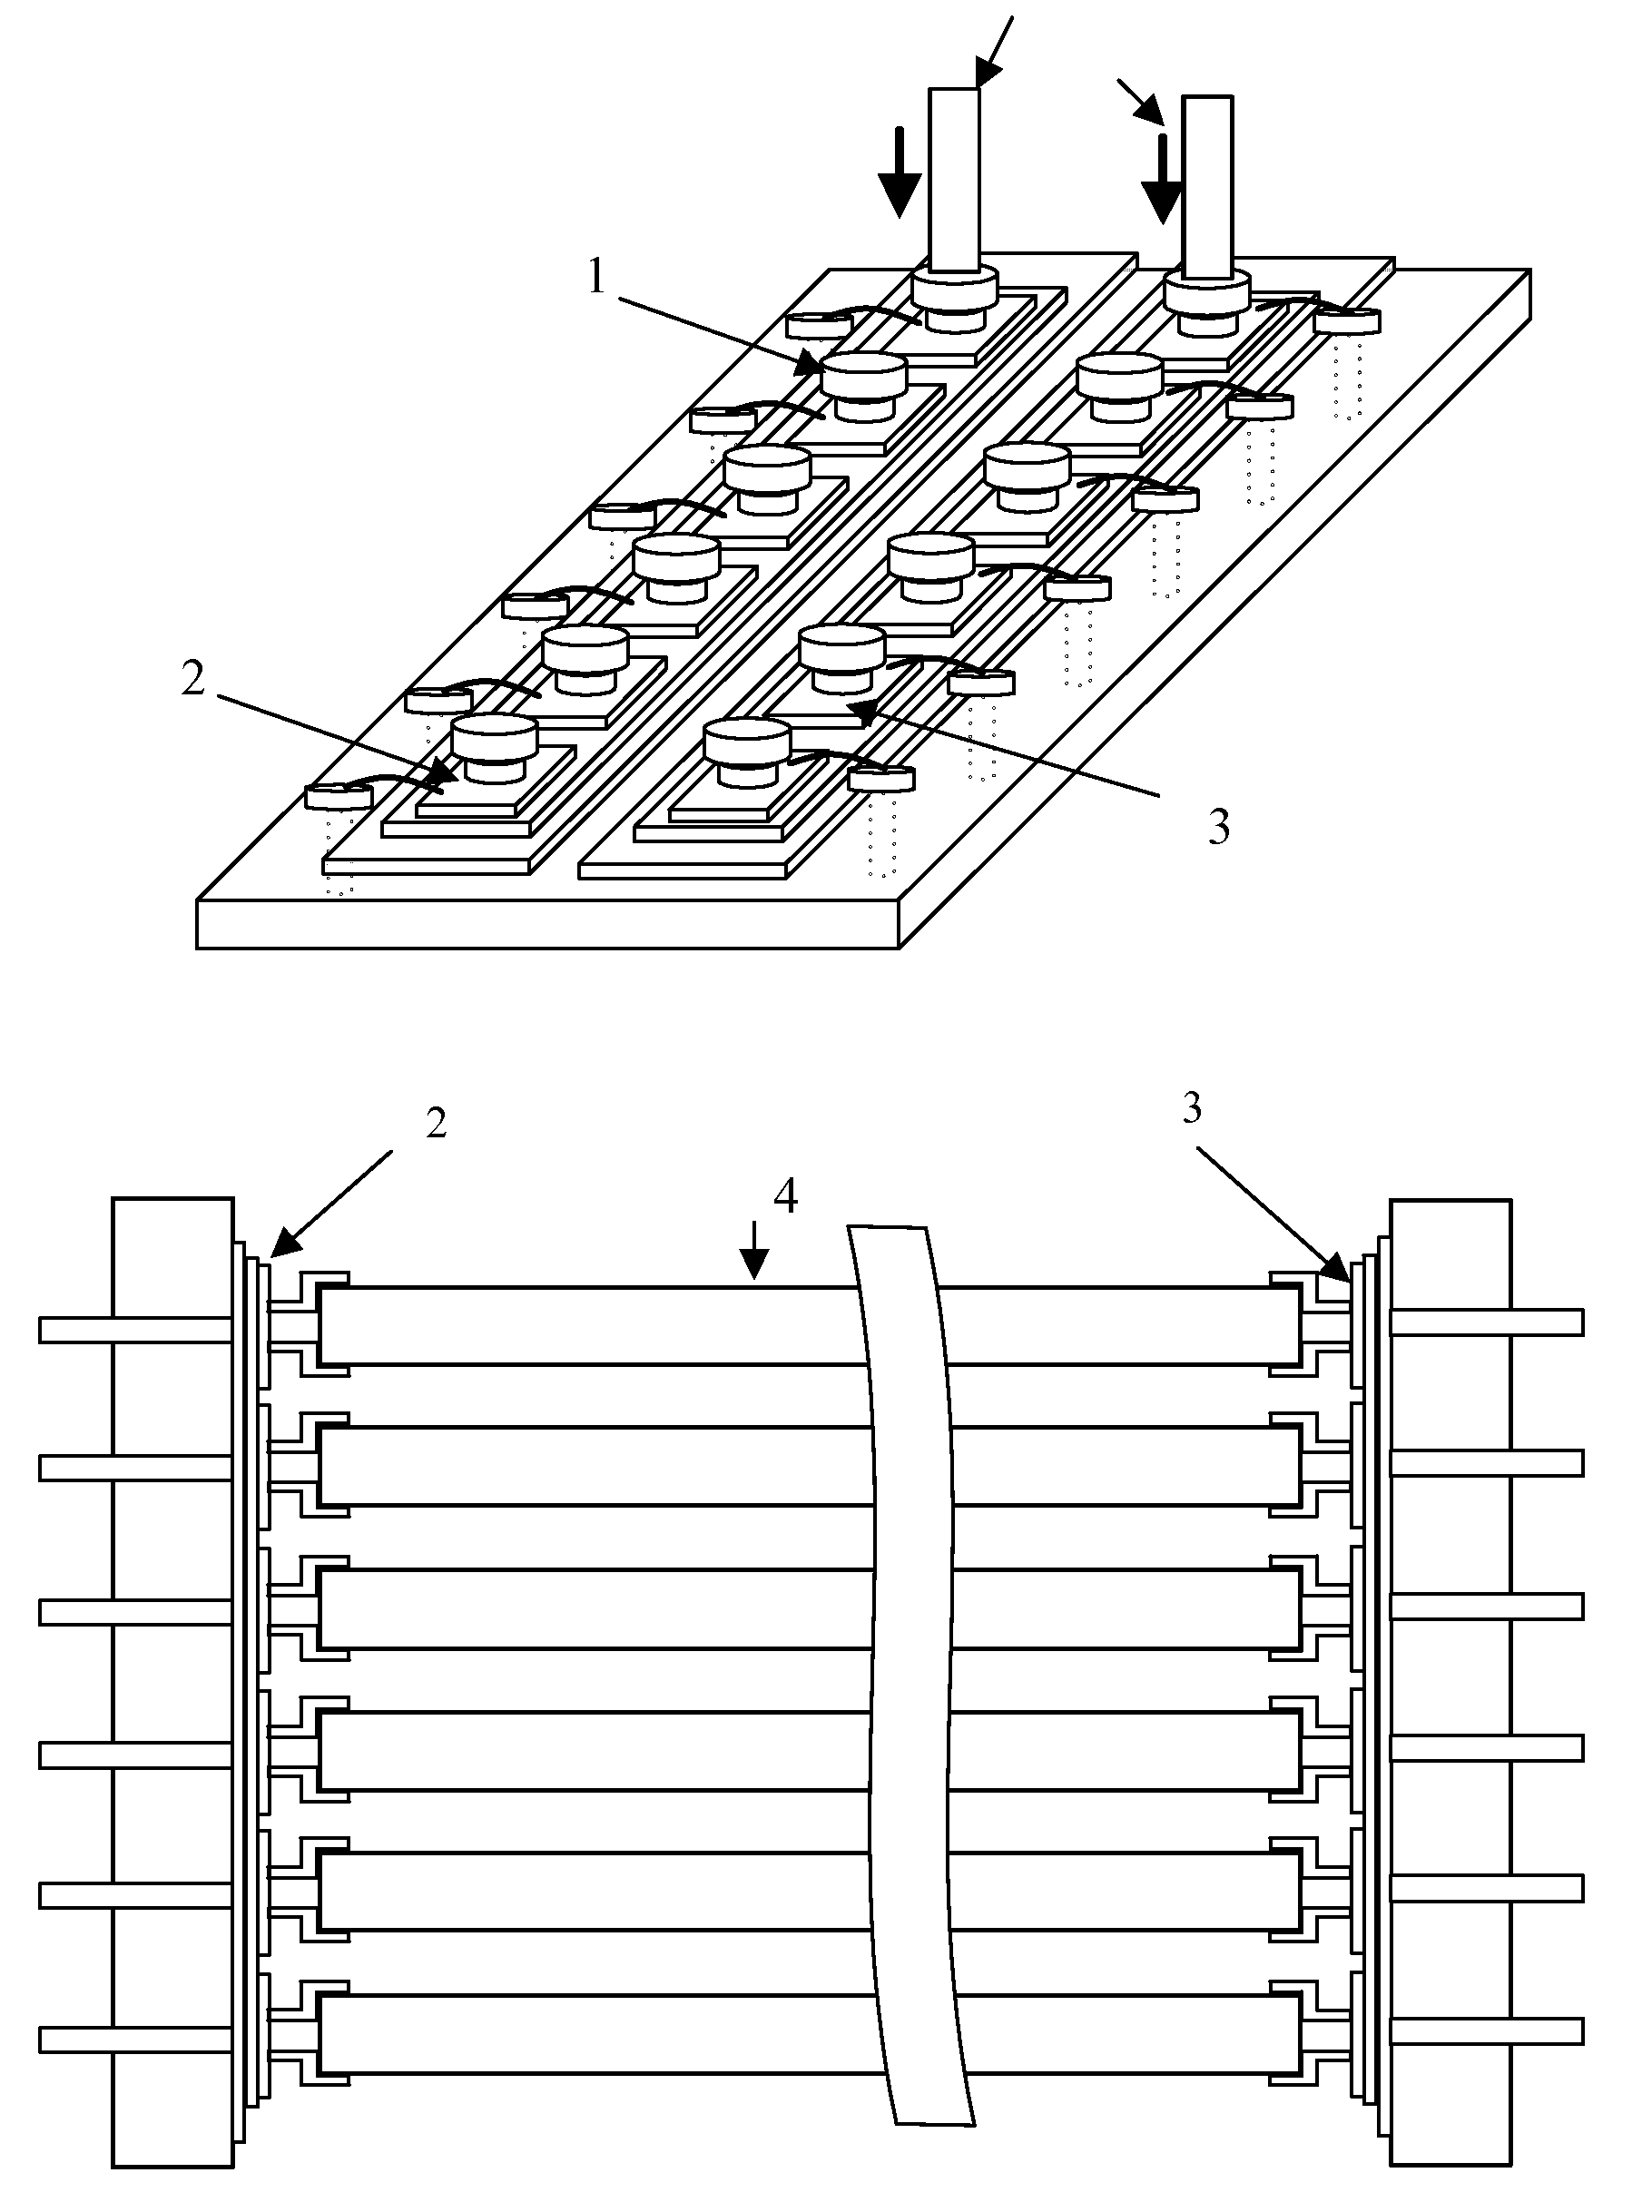 Integrated circuit having compact high-speed bus lines for optical signal